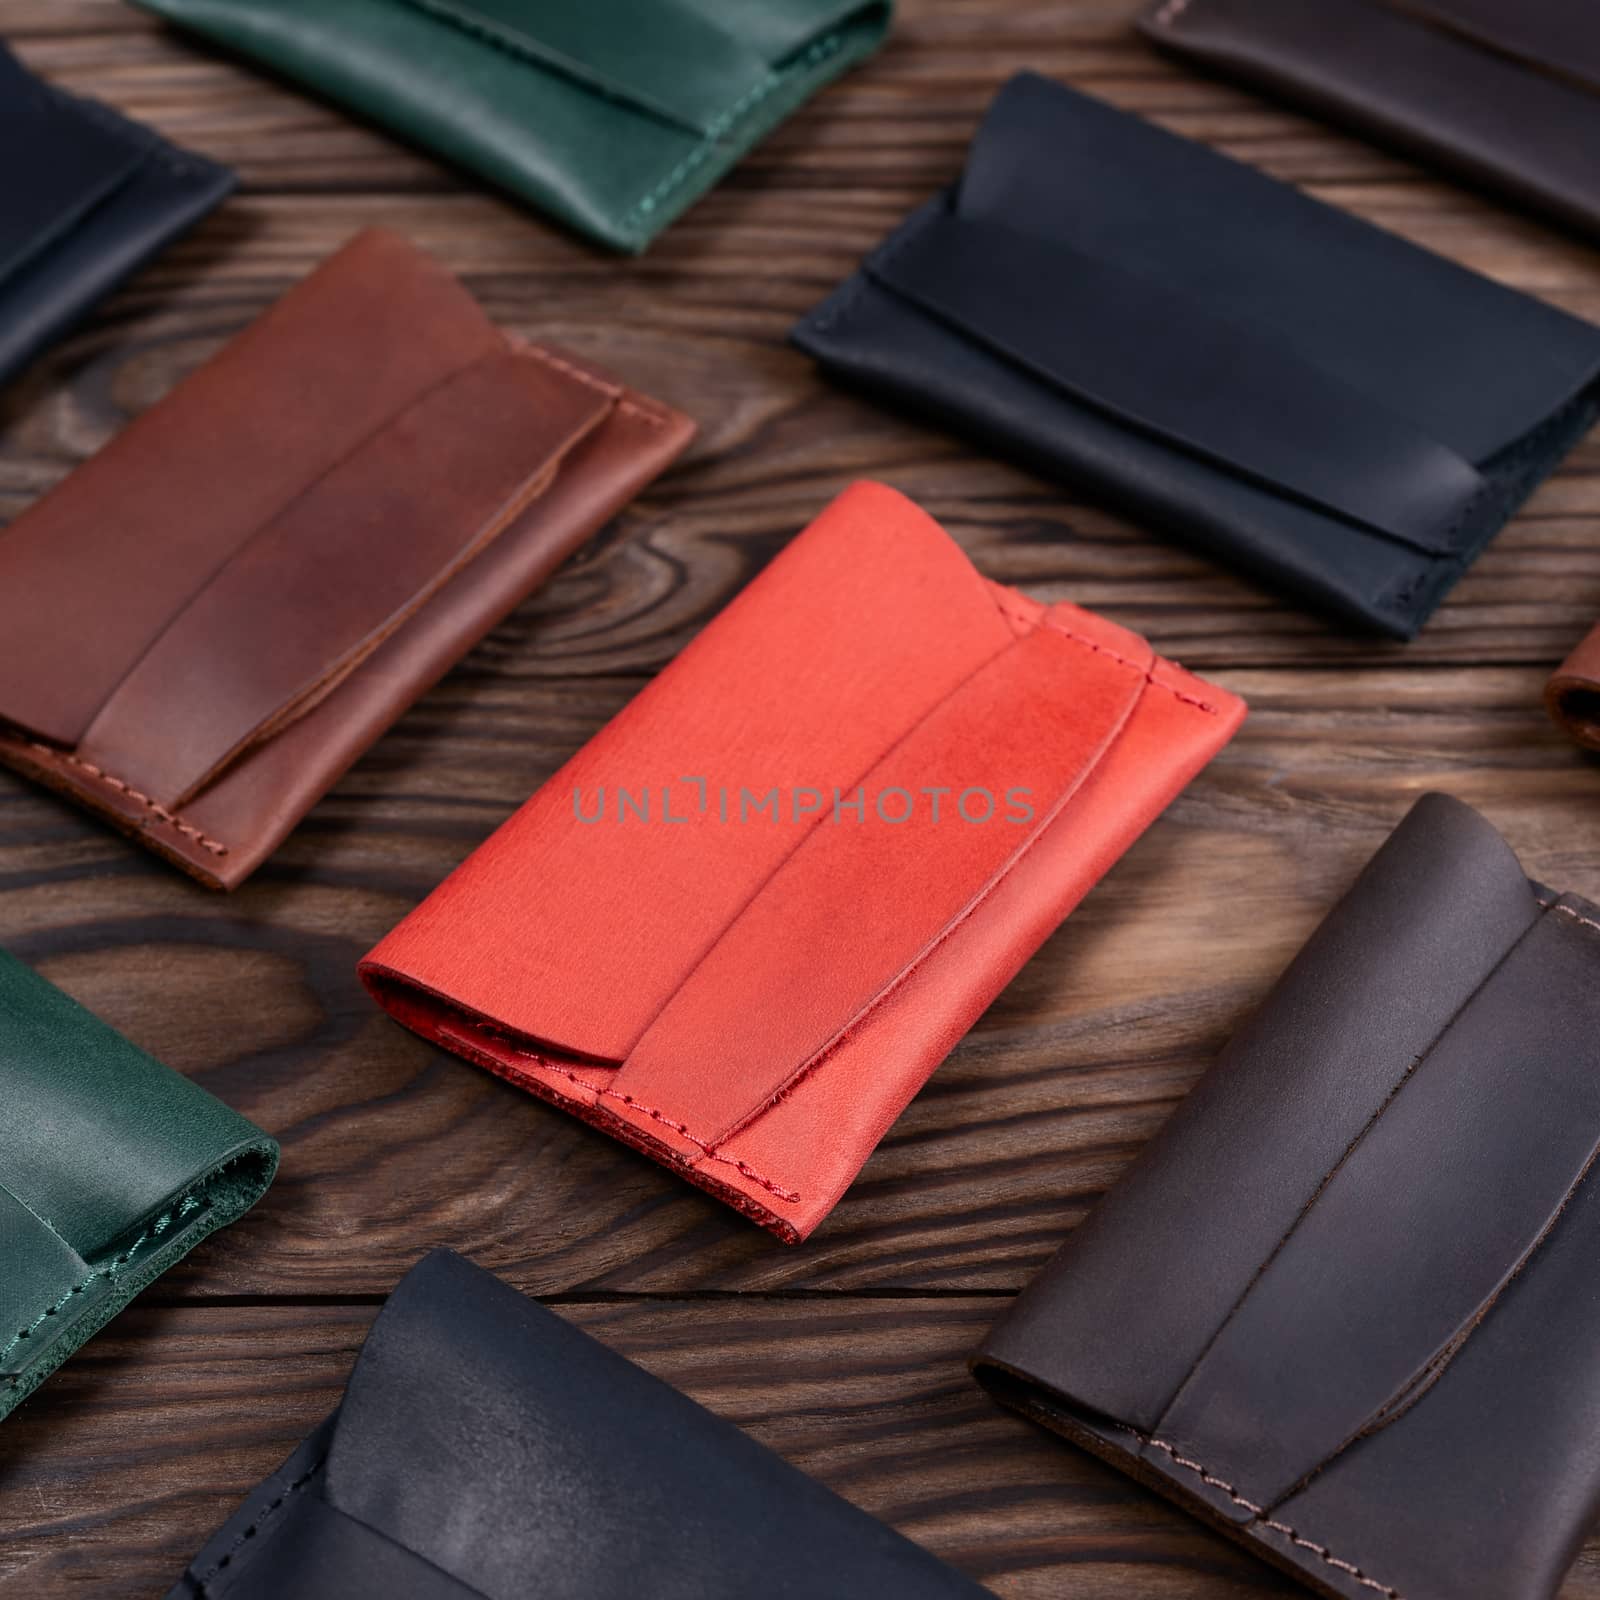 Flat lay photo of five different colour handmade leather one pocket cardholders.  Red, black, blown, ginger and green colors. Stock photo on wooden background. by alexsdriver